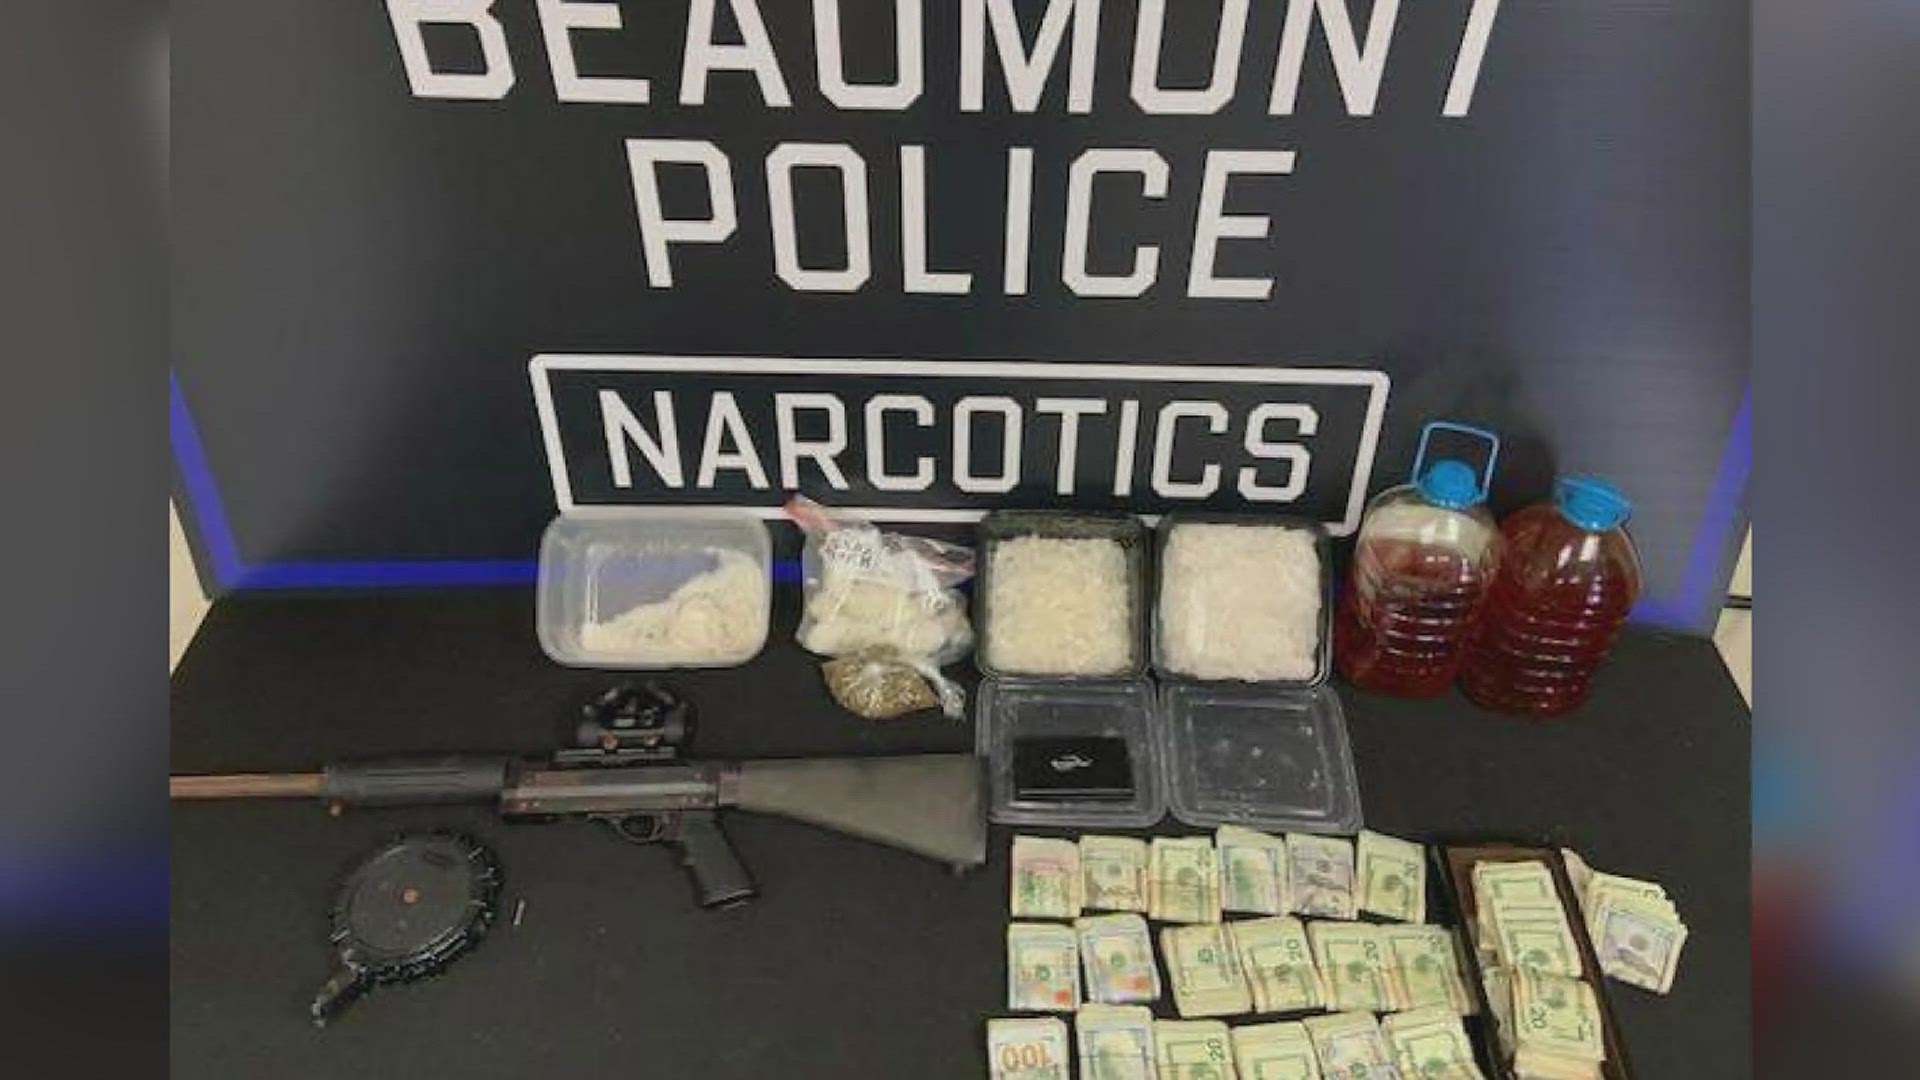 On June 14, around 10 a.m. detectives with the Beaumont Police Narcotics Unit conducted two searches.